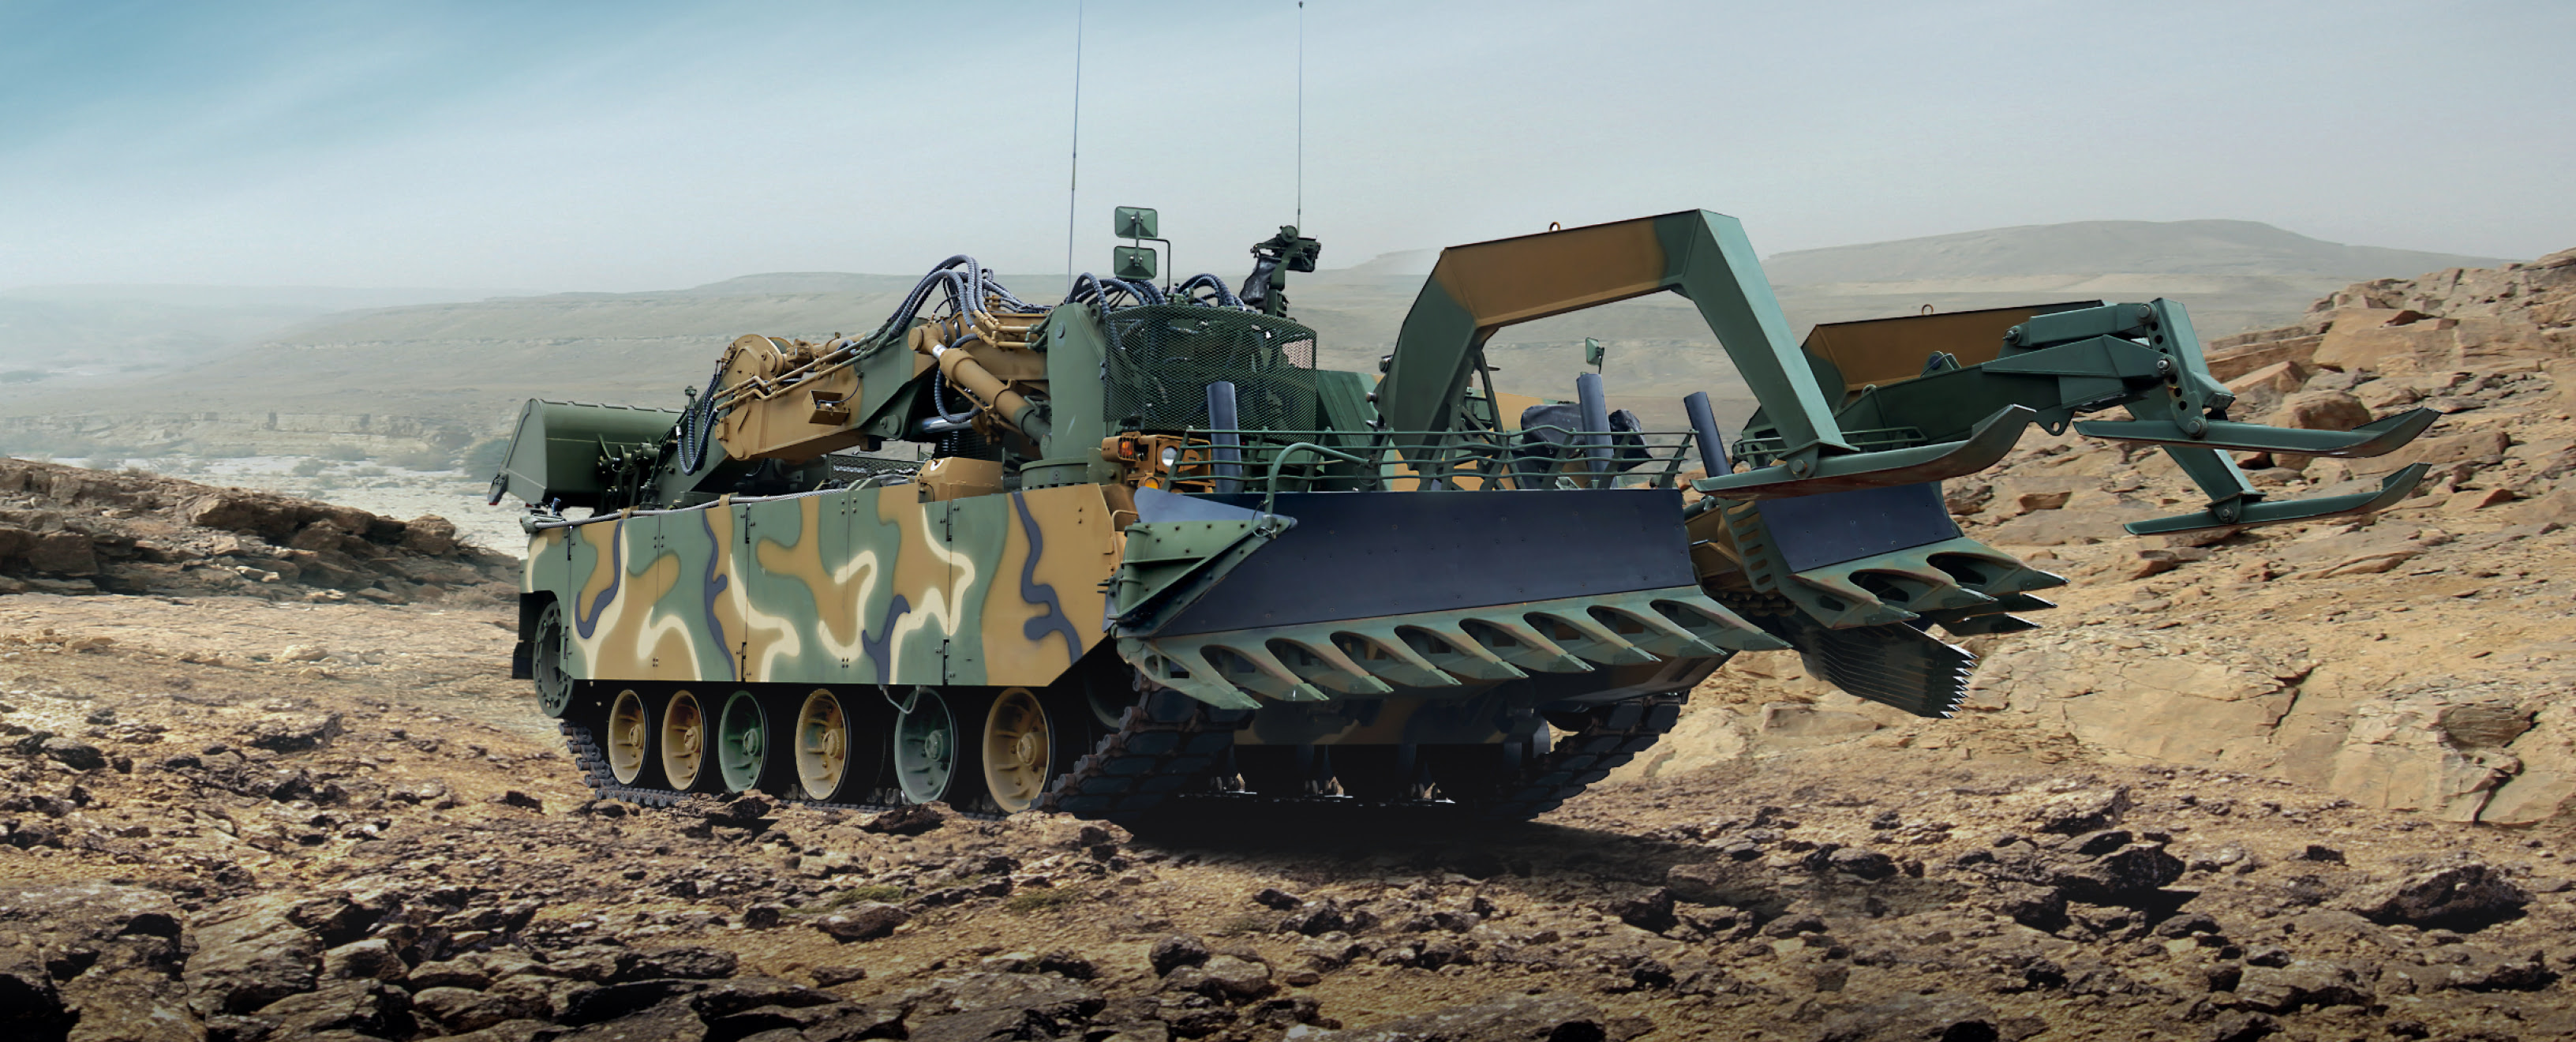 South Korea will transfer K600 Rhino armoured vehicles for demining to the AFU, they are based on the K1A1 tank.